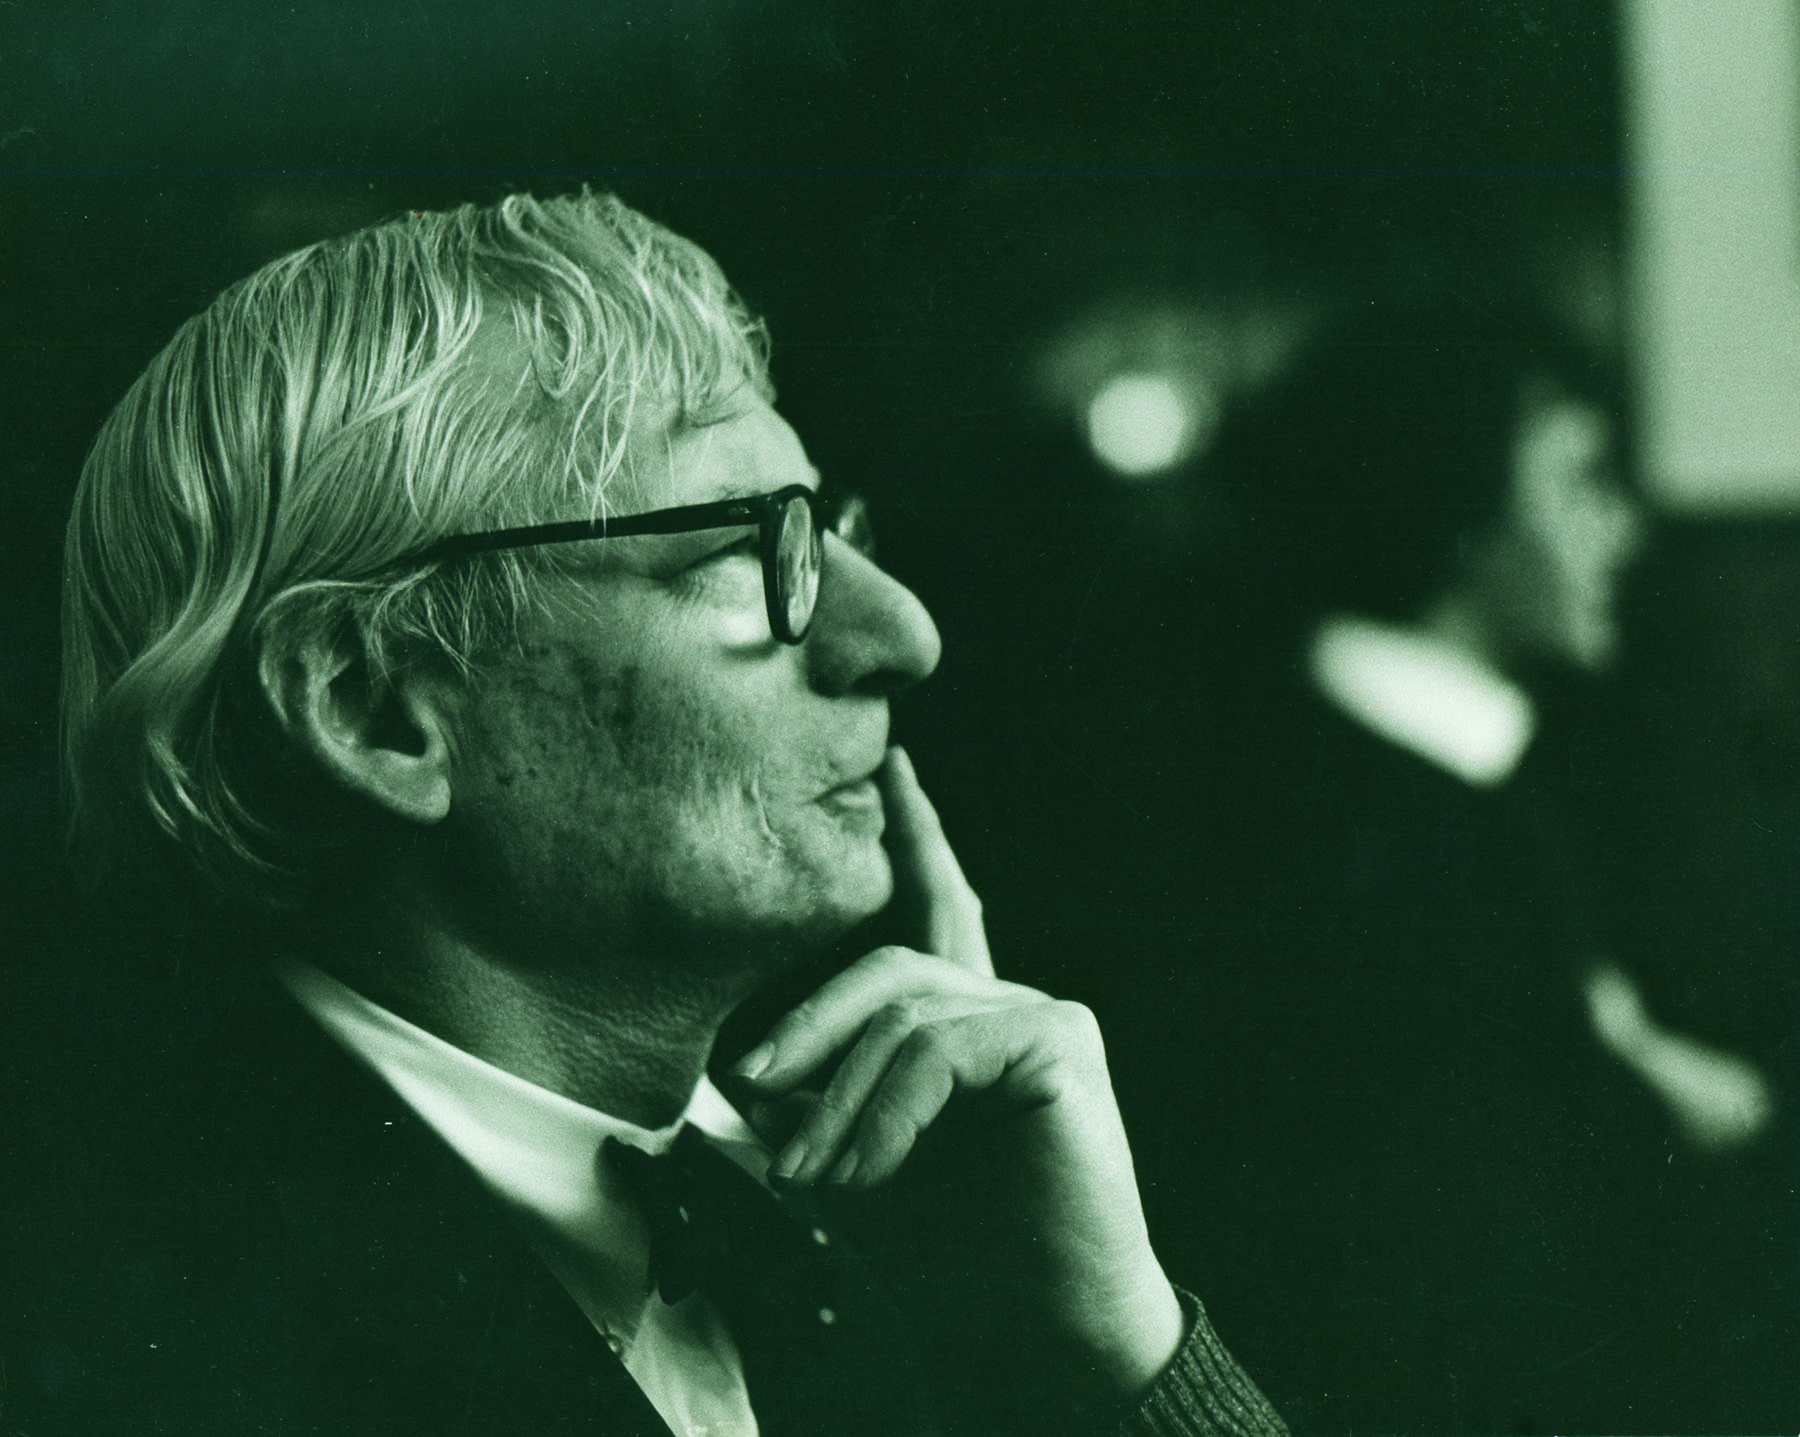 “The Notebooks and Drawings of Louis I. Kahn” was first published by Falcon Press in 1962, with a press run of 1,800 copies.